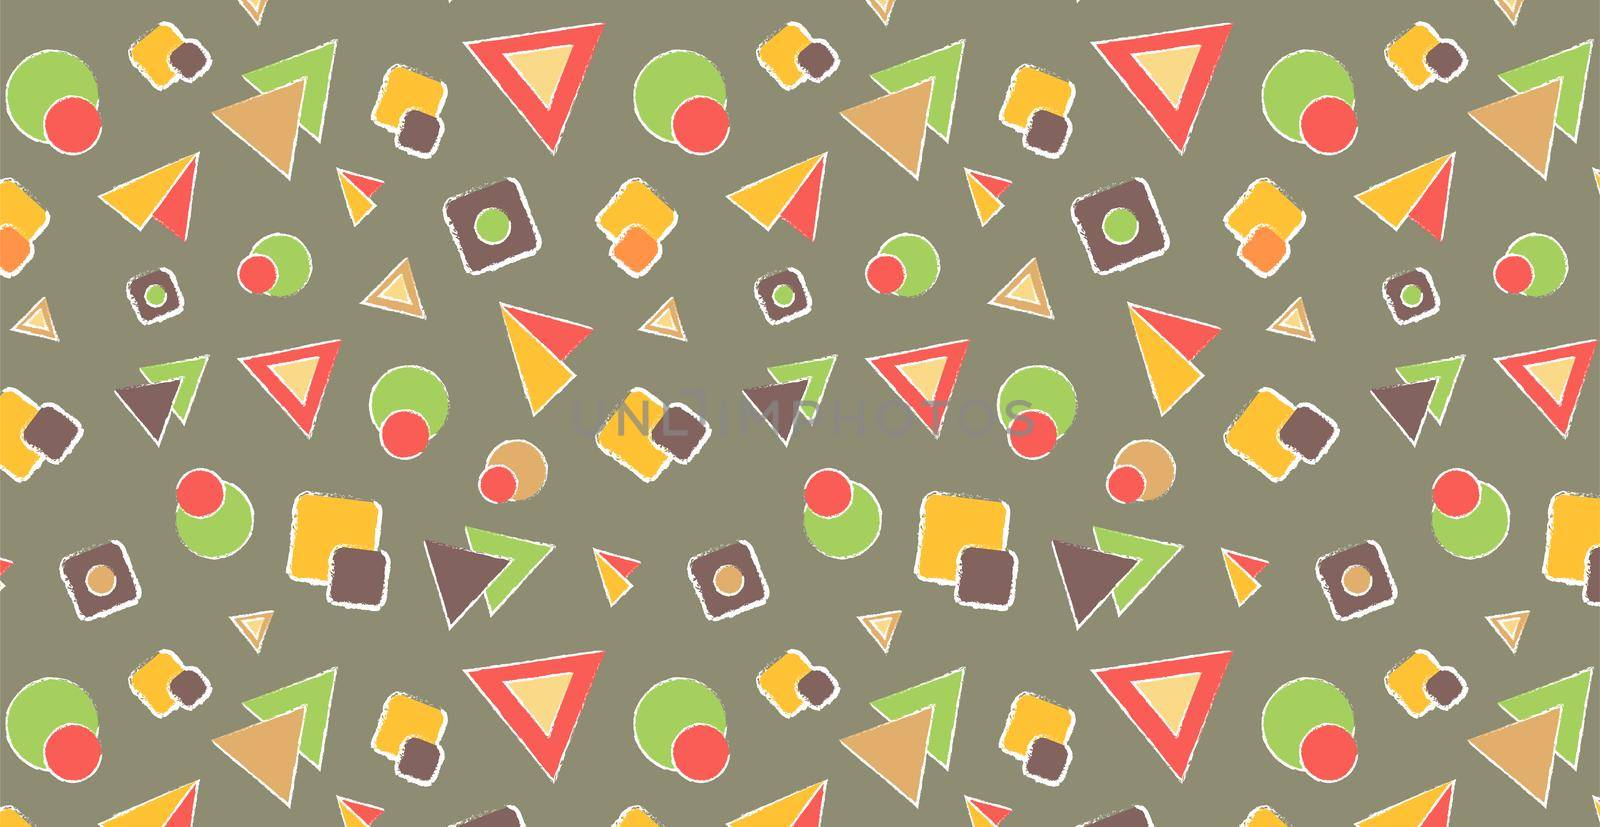 Abstract geometric pattern for children's themes. Bright multi-colored geometric shapes. Ideal for baby wallpapers, wrapping paper, napkins.